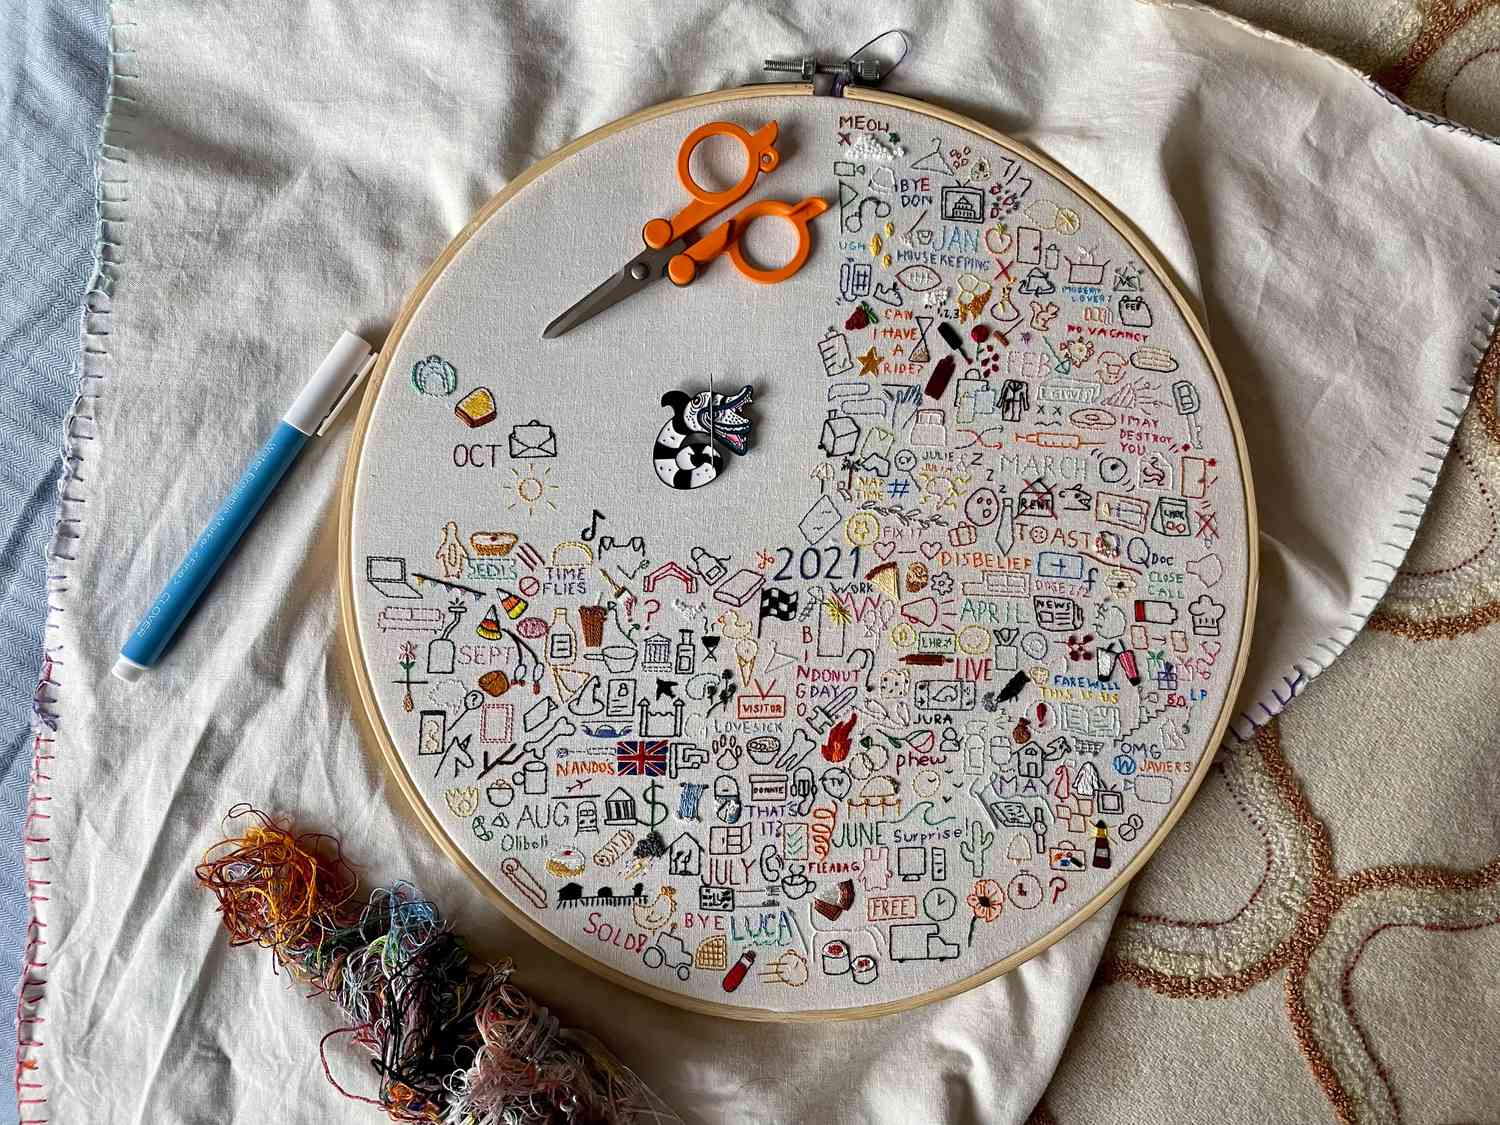 Embroidery journaling with a few months' progress (October 2021 update with scissors)